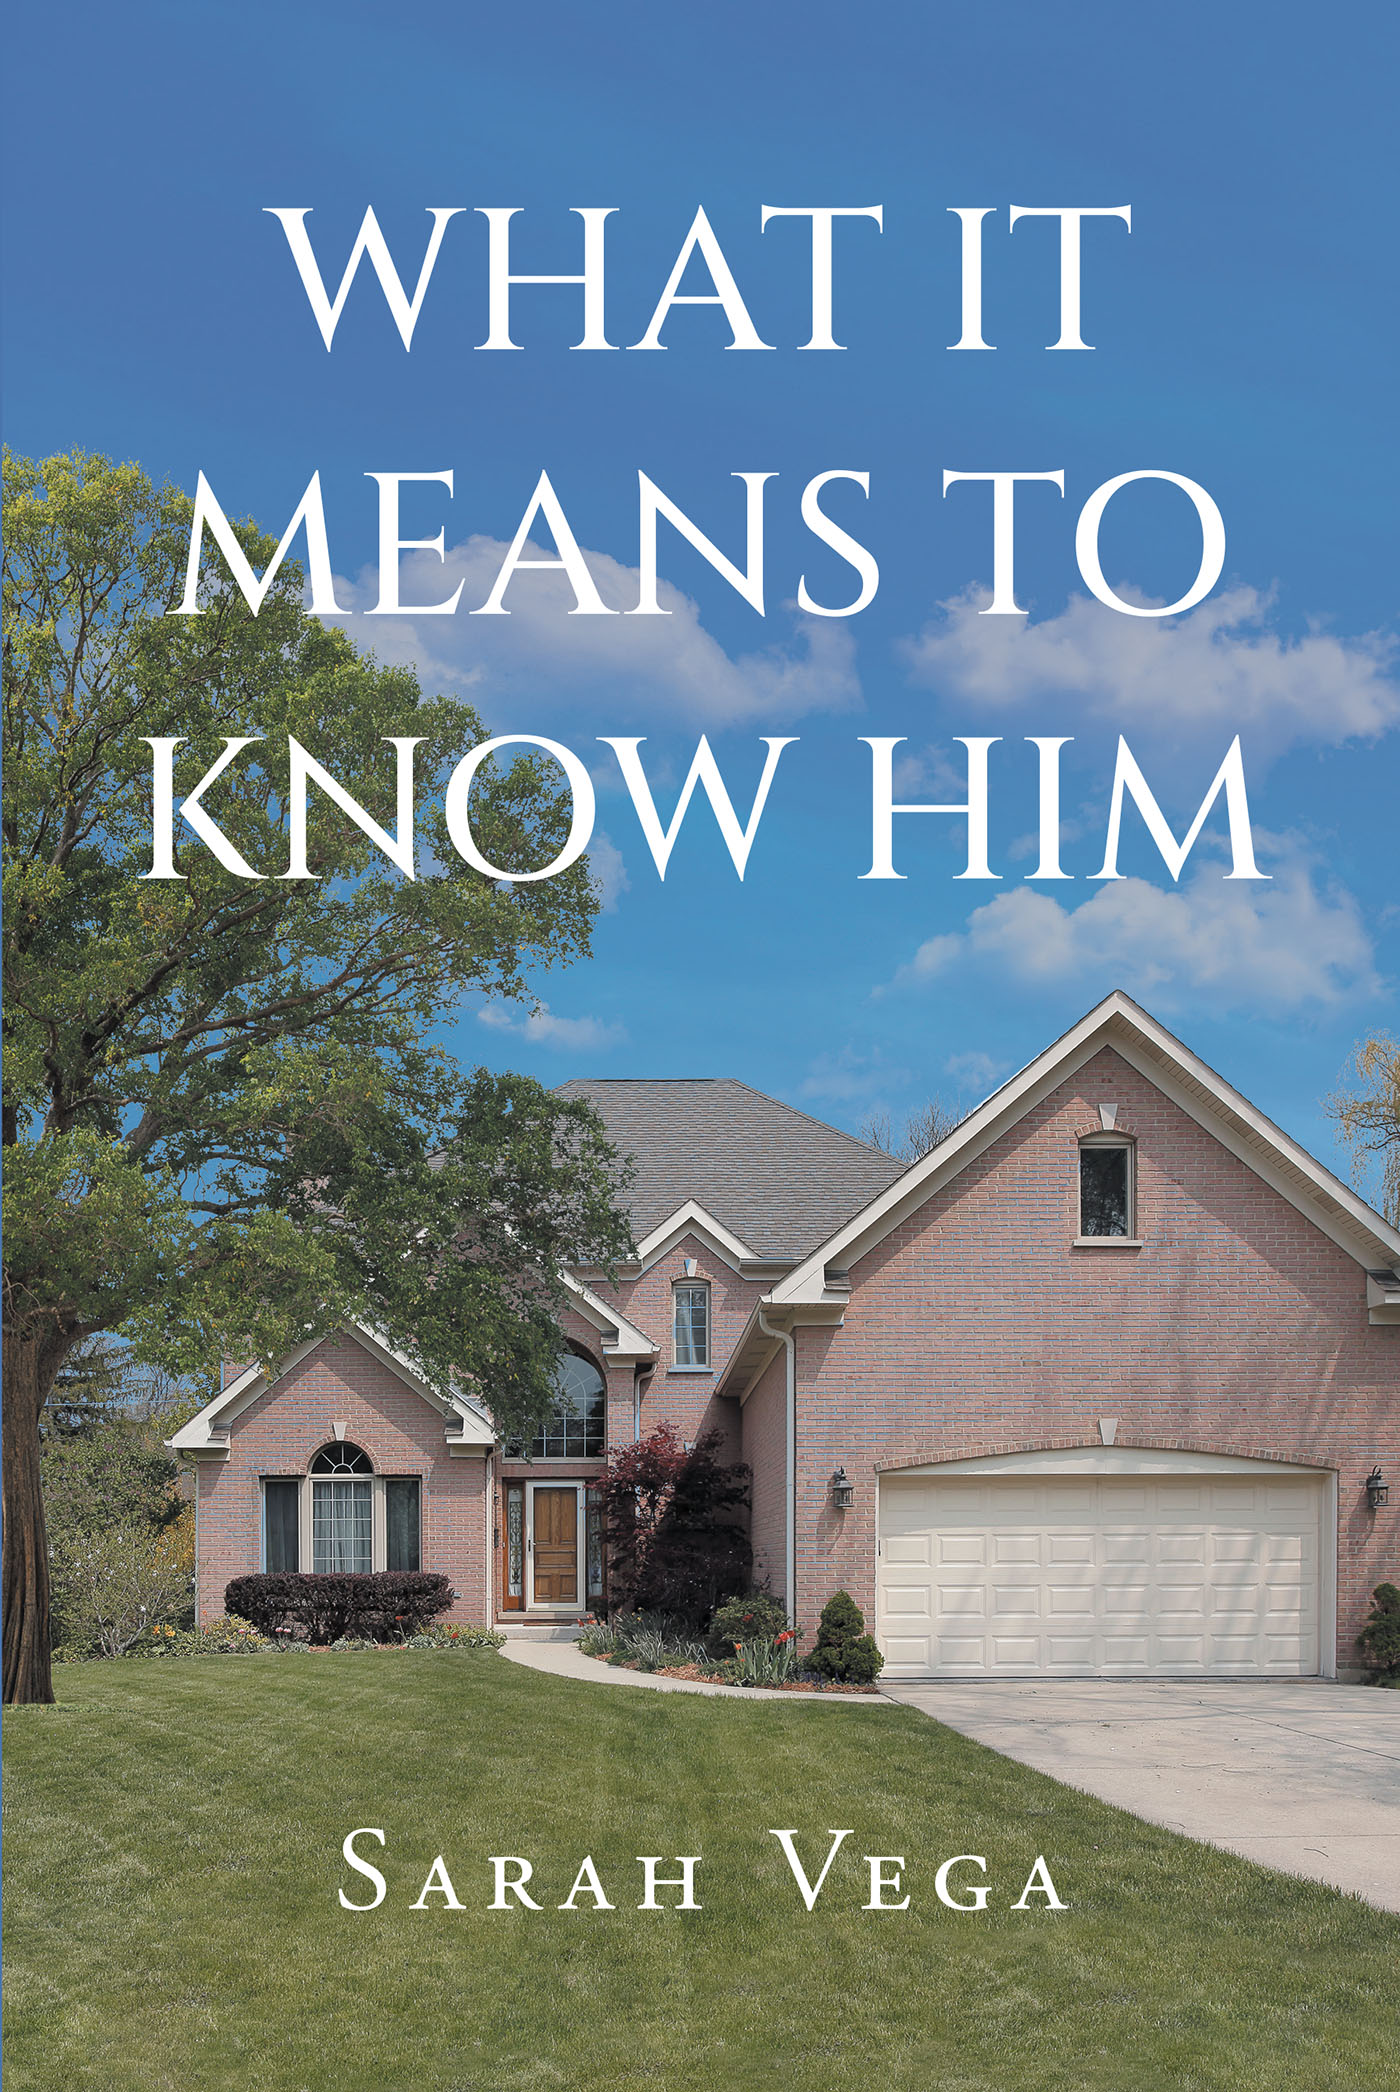 Author Sarah Vega’s New Book, "What It Means to Know Him," Follows a Woman Who Realizes That God is Not Testing Her, But Rather Carrying Her Through Her Trials